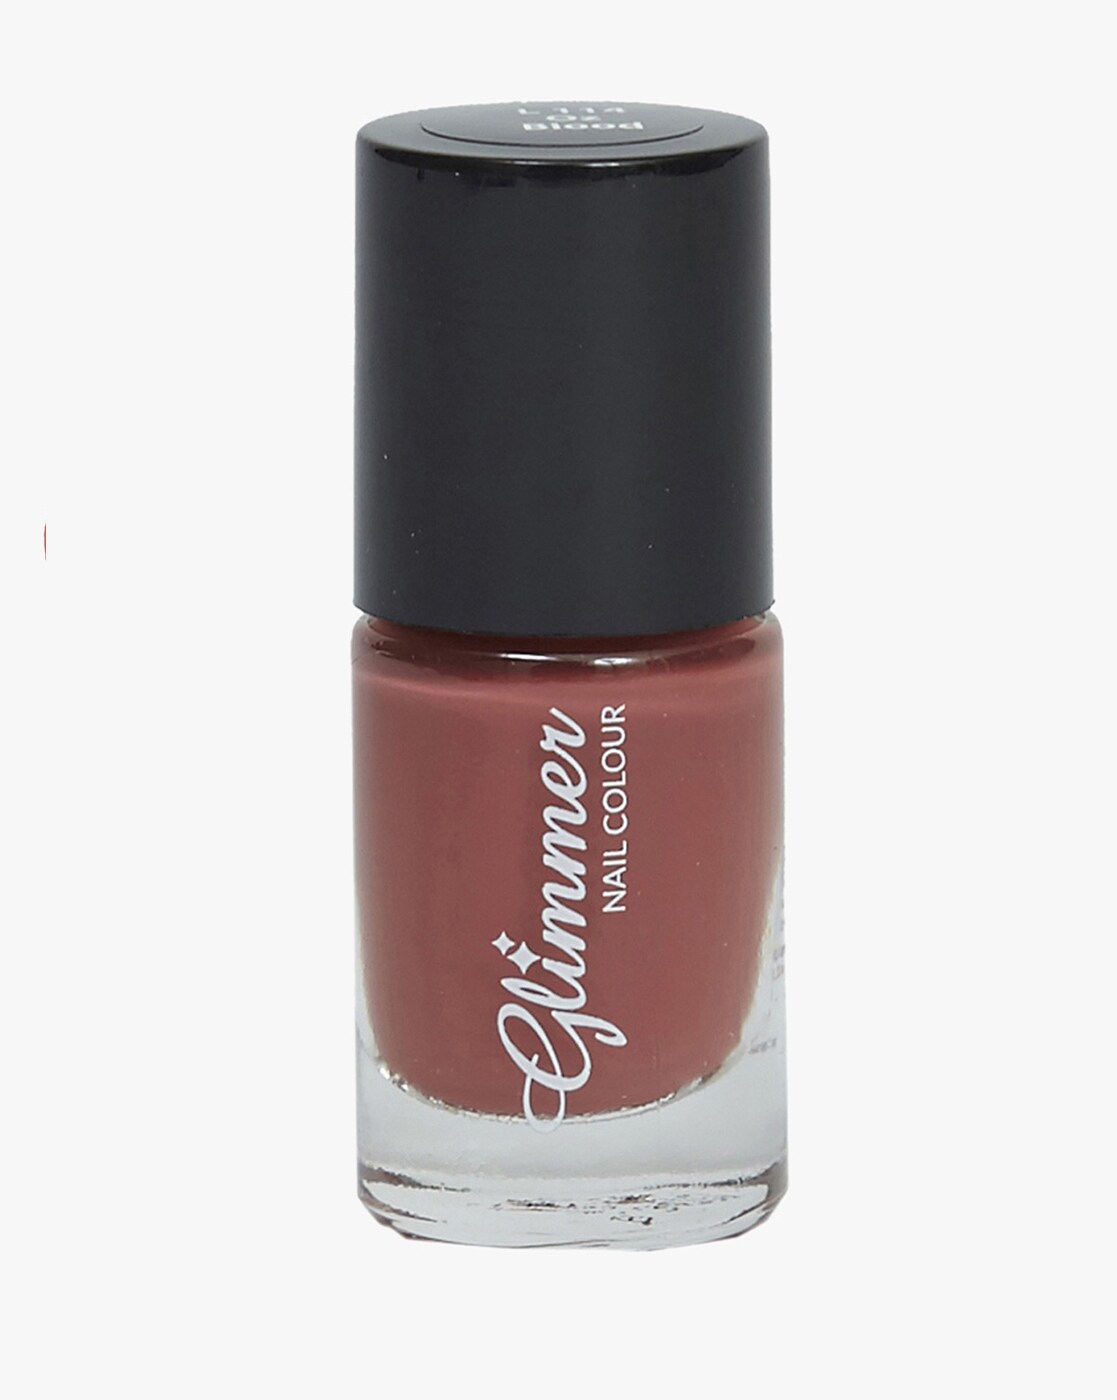 Glimmer Chic Nail Enamel nail polish 02 chic - Price in India, Buy Glimmer  Chic Nail Enamel nail polish 02 chic Online In India, Reviews, Ratings &  Features | Flipkart.com